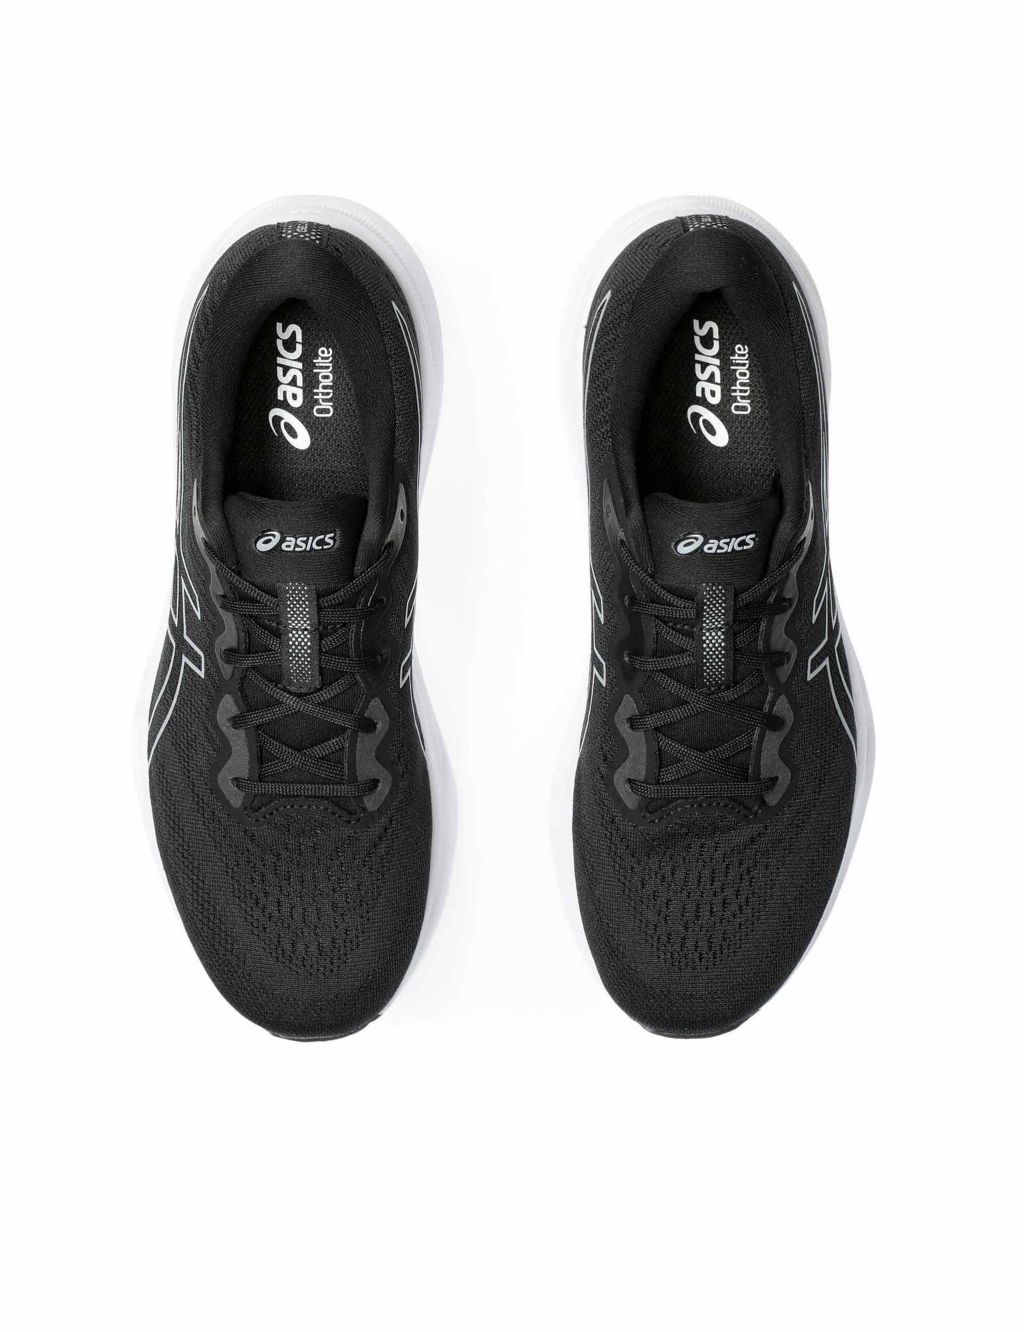 Pulse 15 Lace Up Trainers image 4